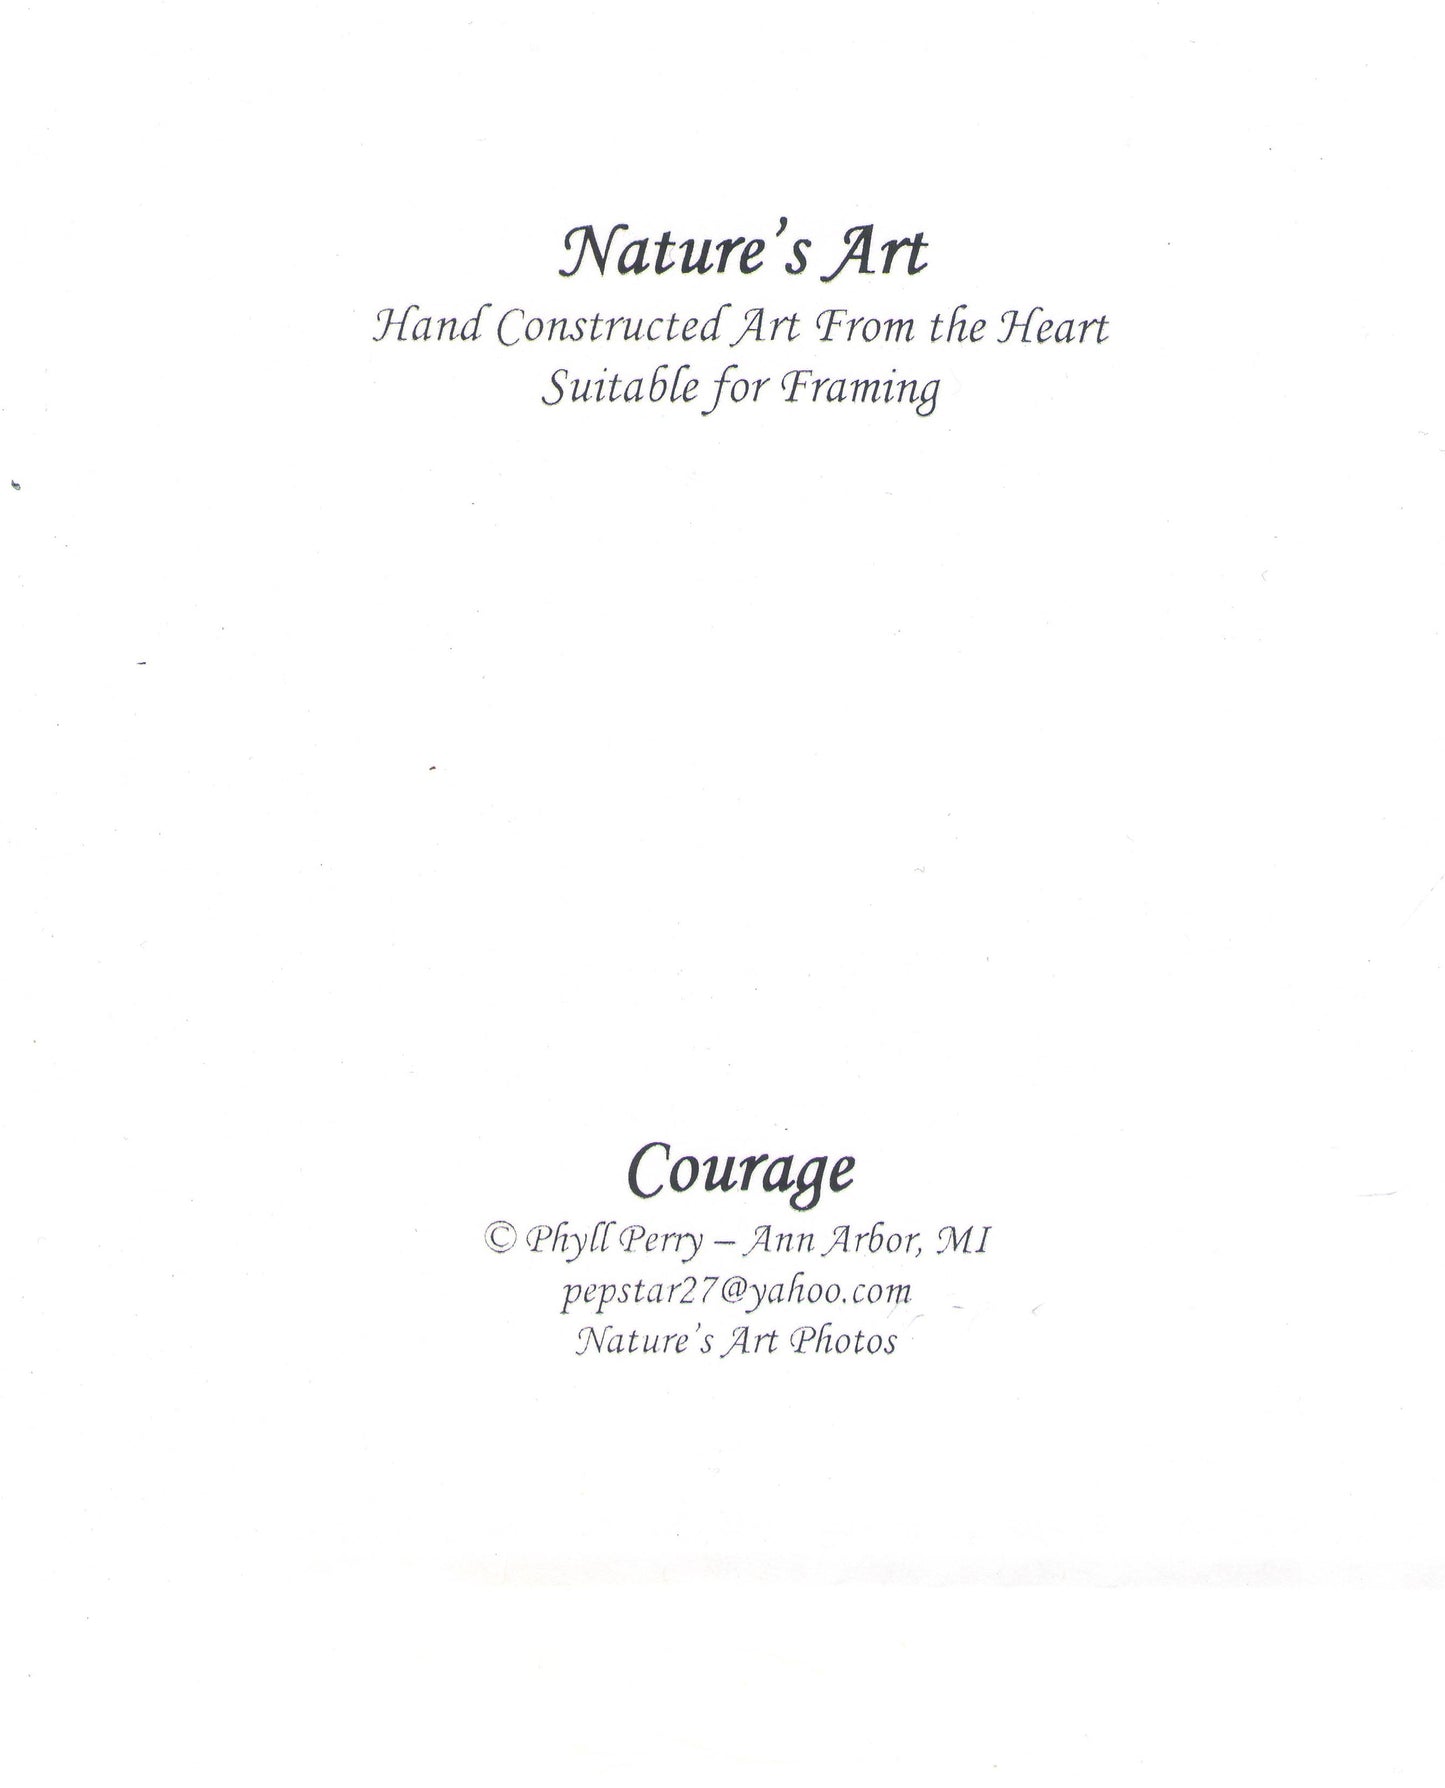 "Courage" greeting card by Nature's Art